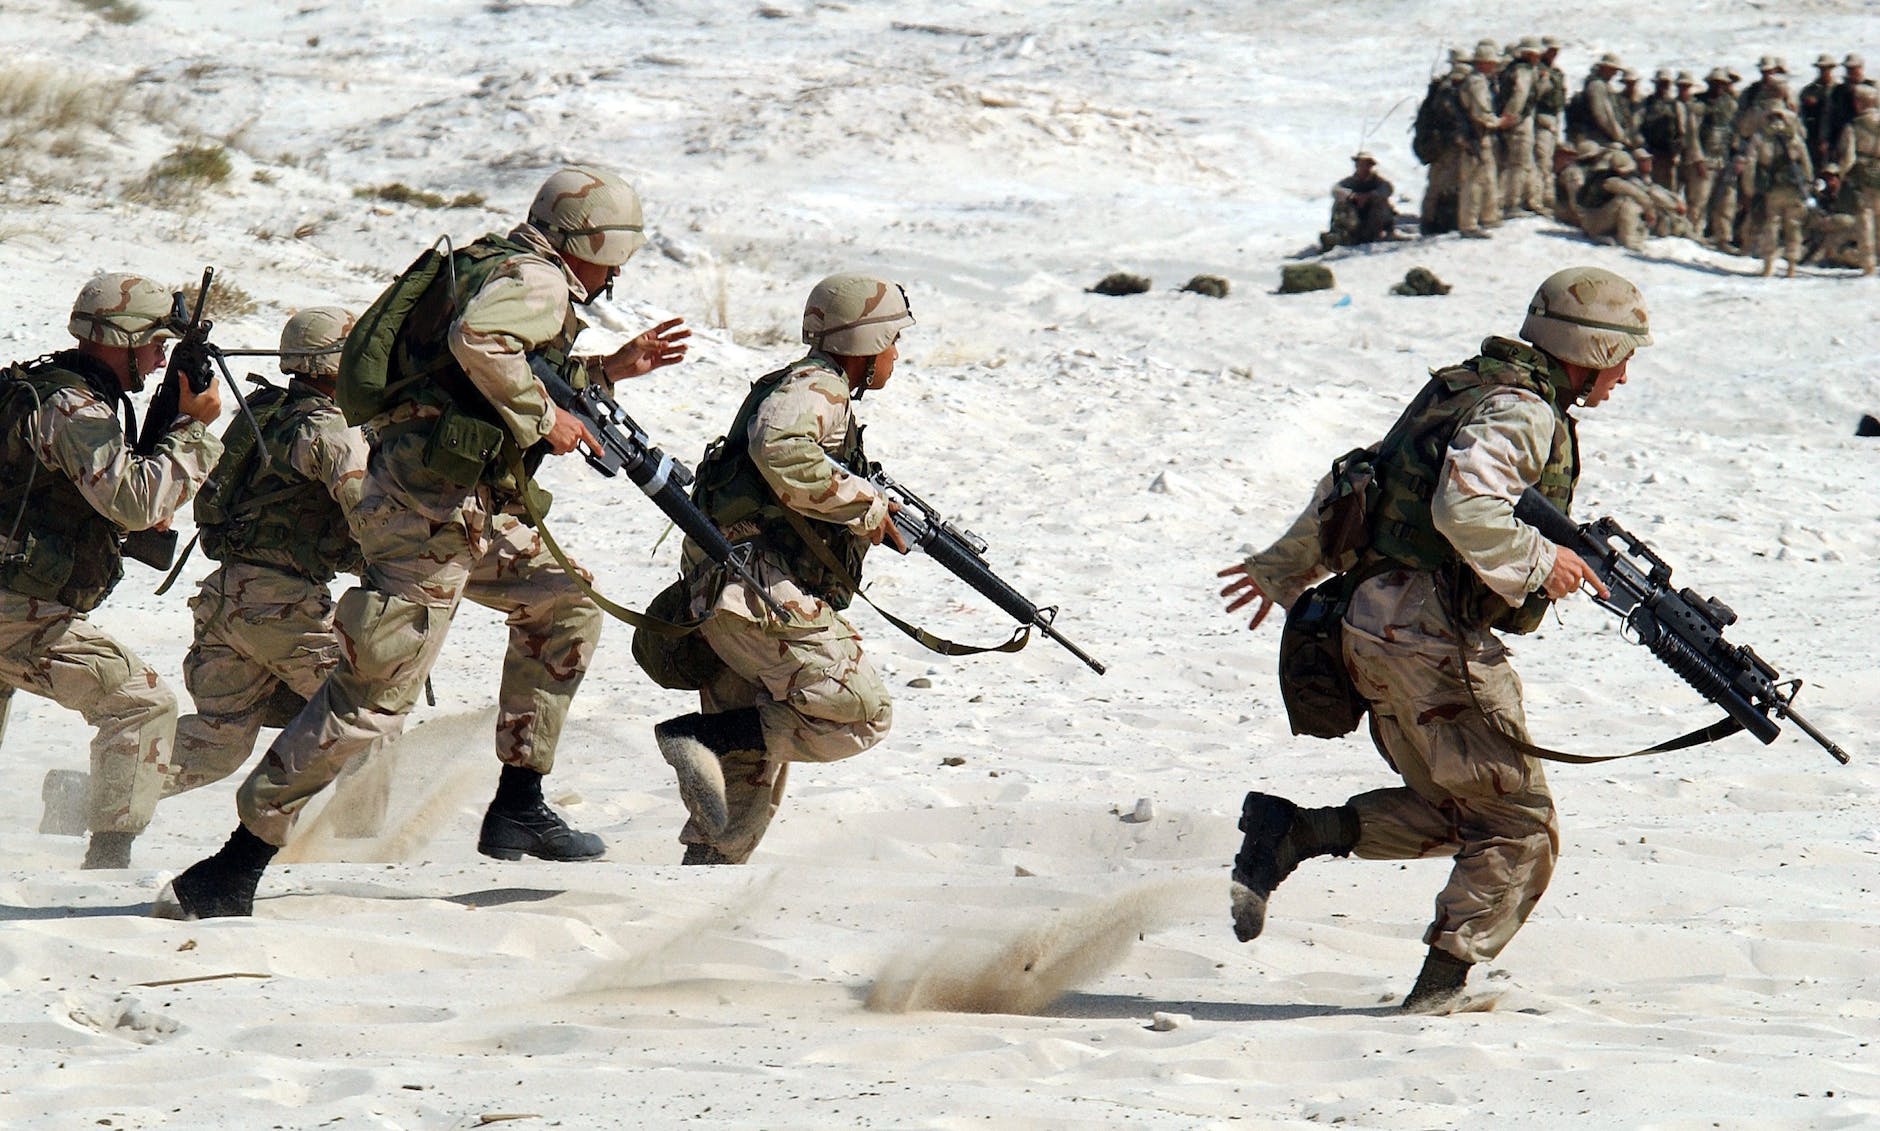 A photo of soldiers with guns running into battle.